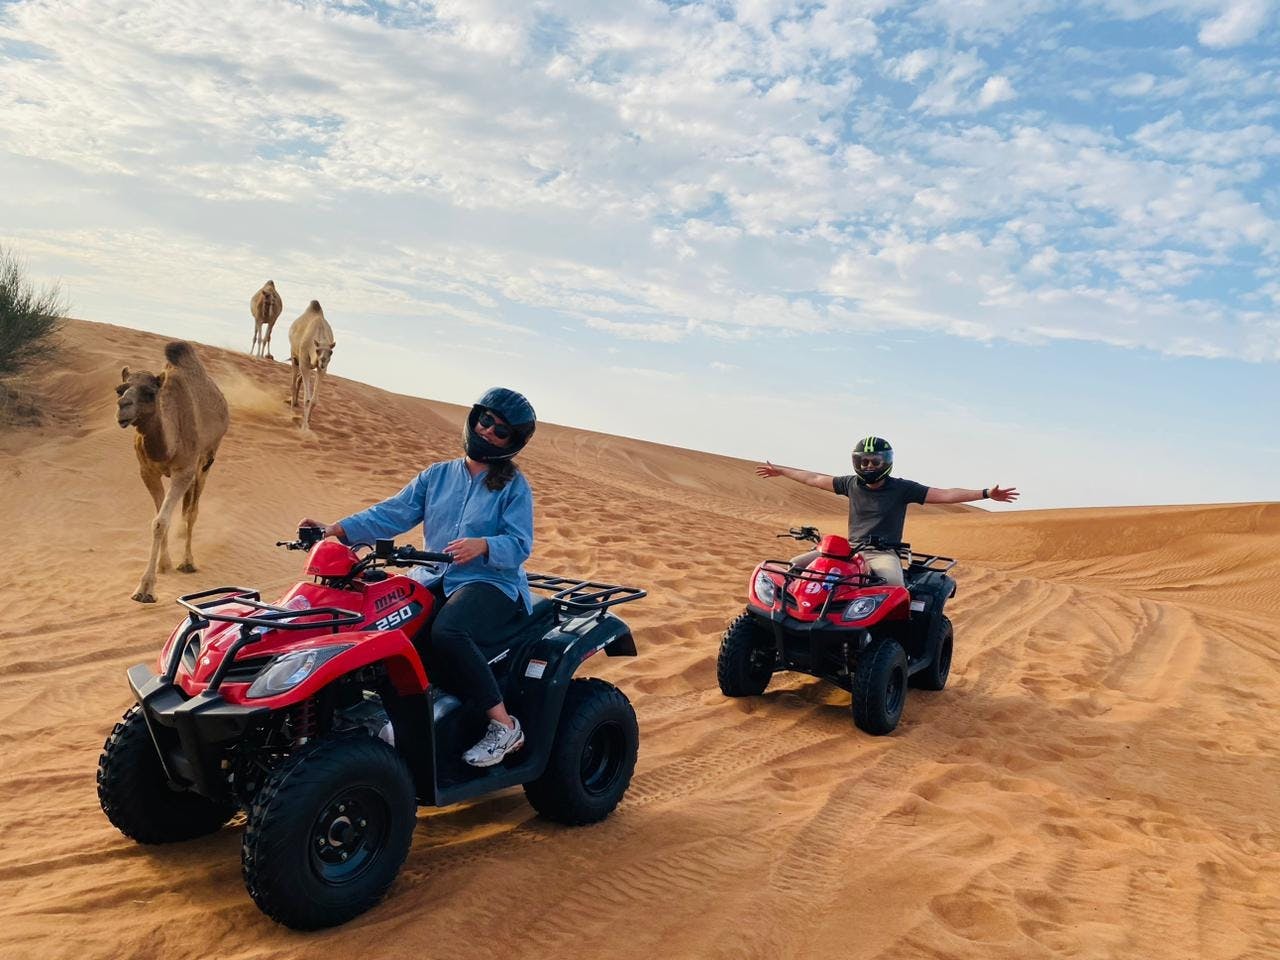 Double quad ride in Dubai Desert with sandboarding camel and BBQ Musement